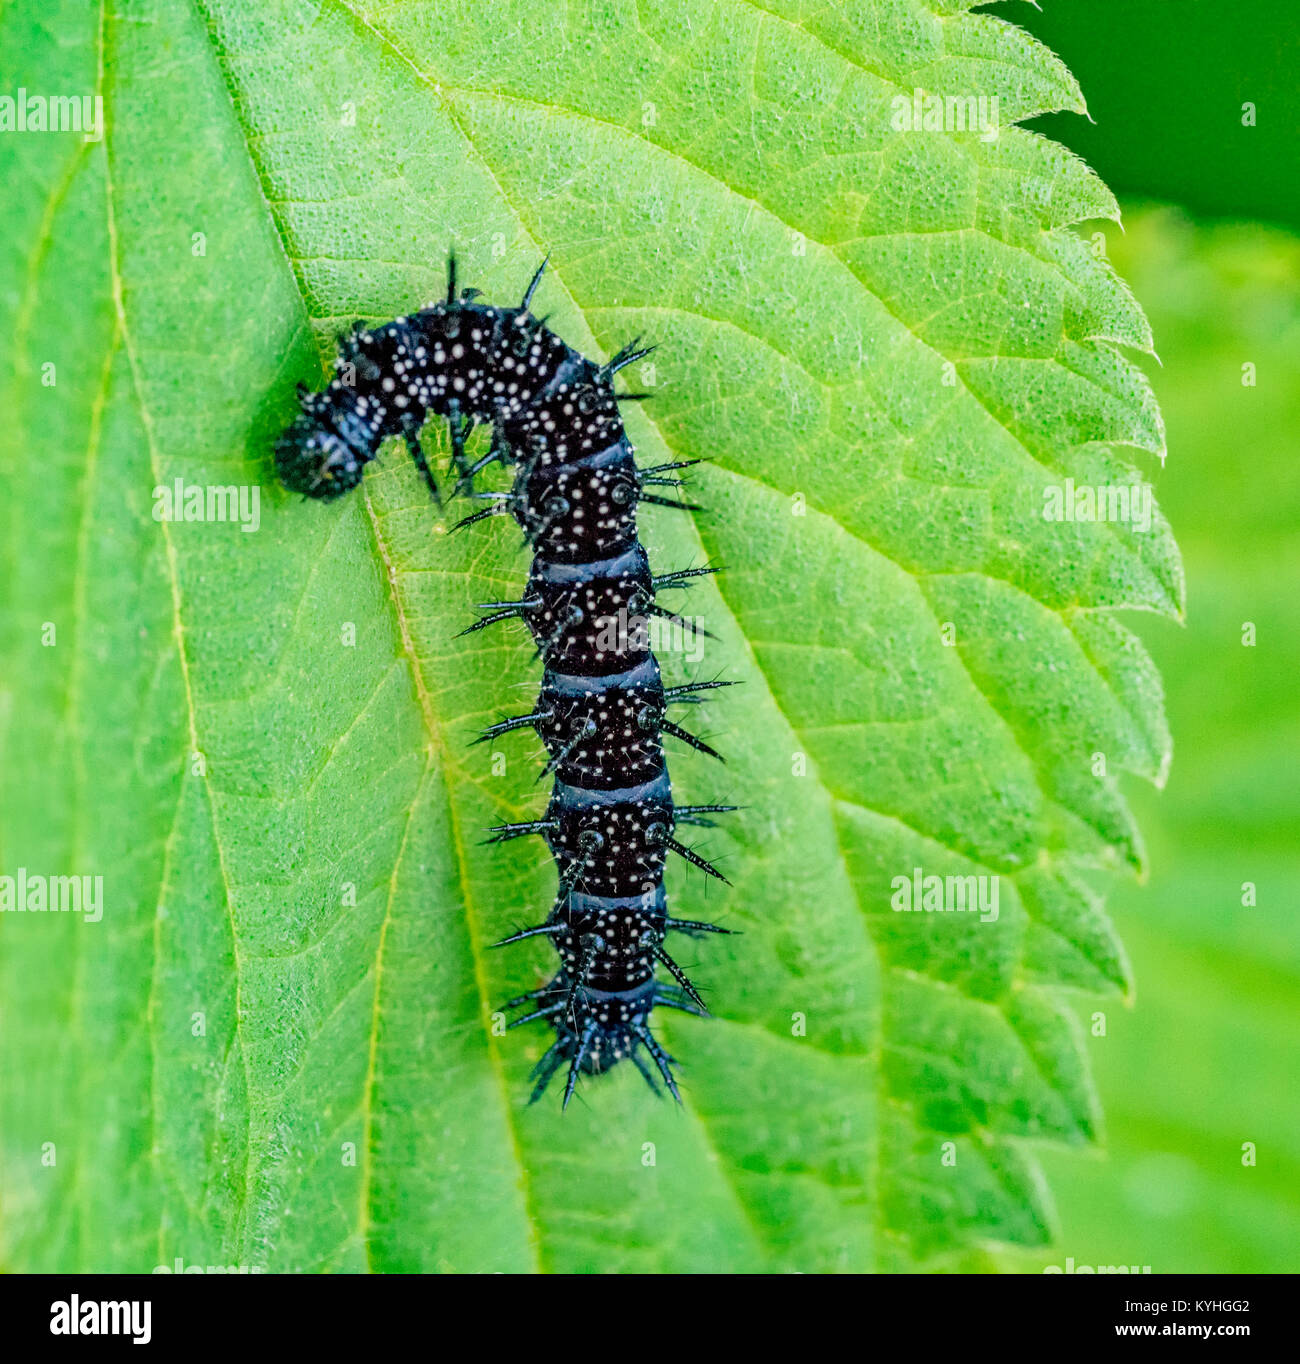 caterpillar of a european peacock butterfly in green nettle ambiance Stock Photo